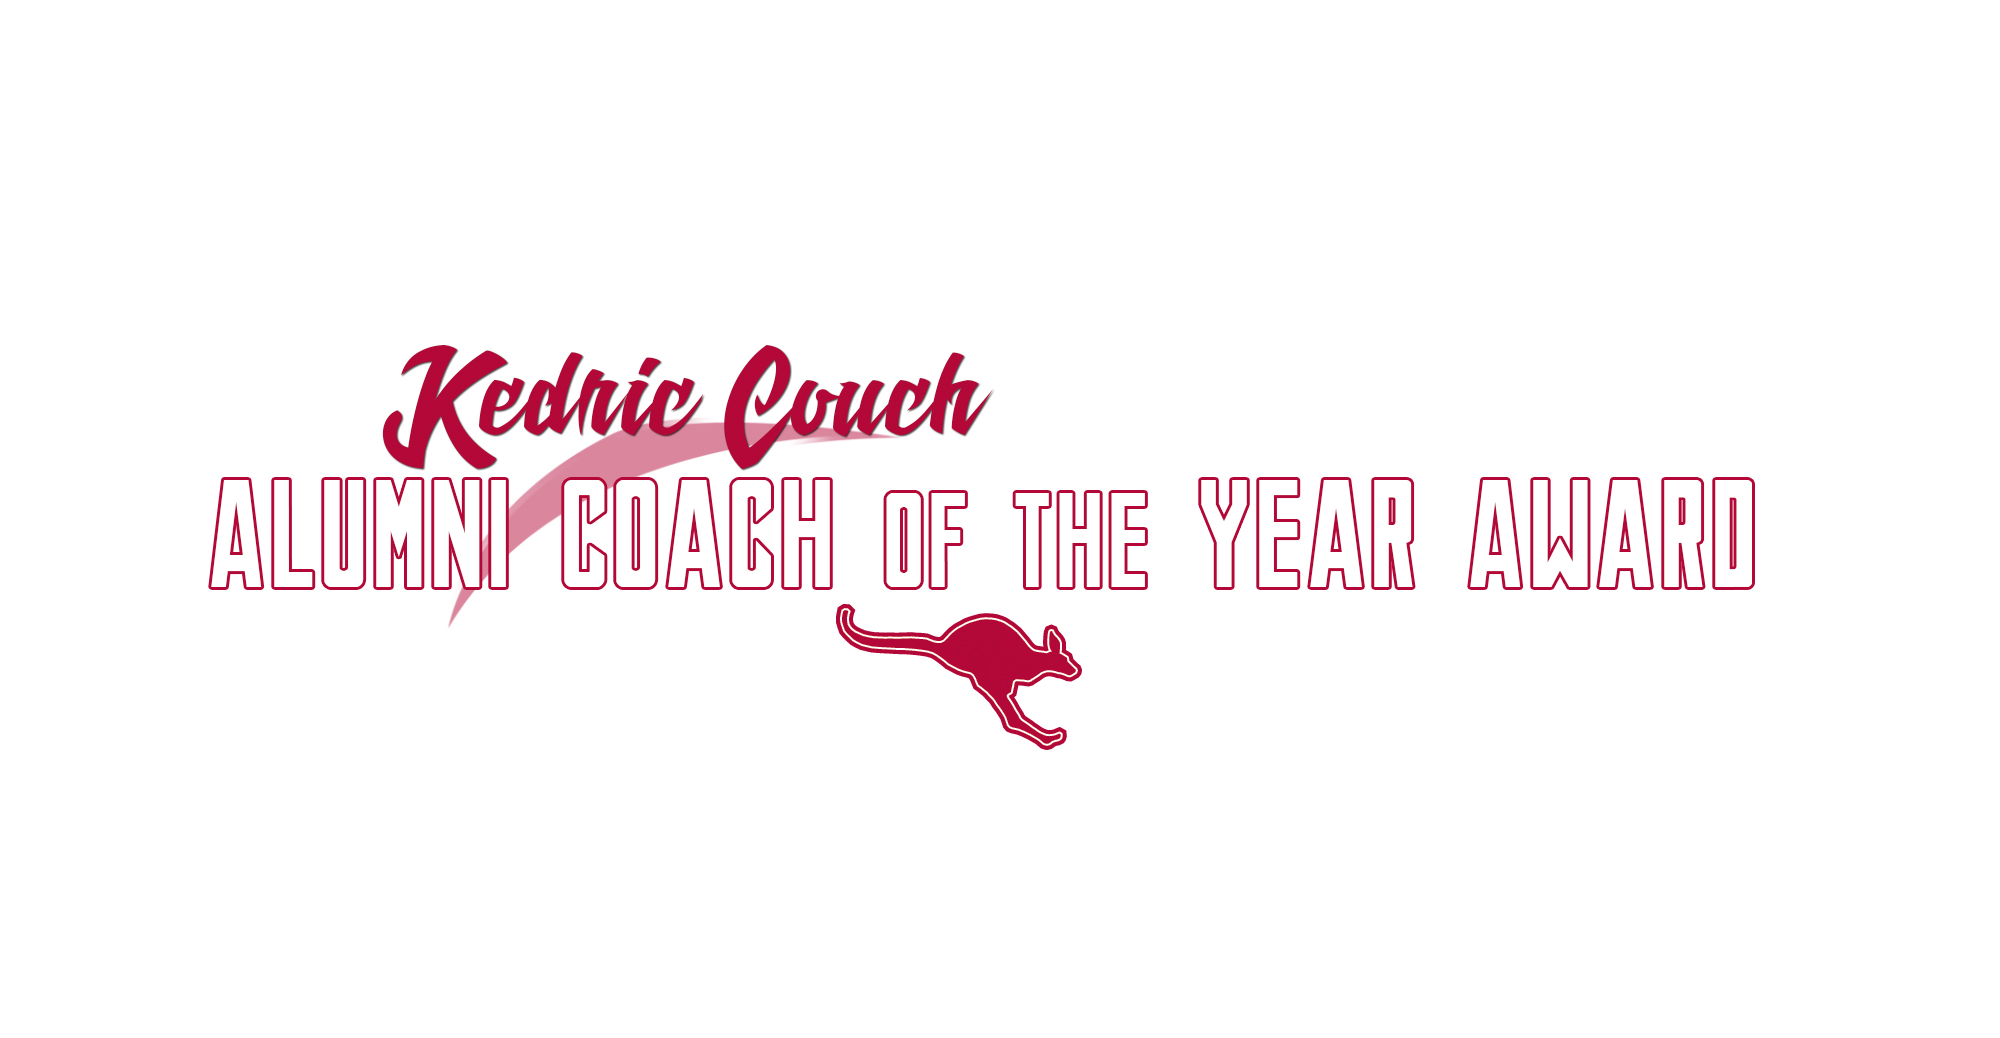 Call for Nominations for the 2018 Kedric Couch Alumni Coach of the Year Award!